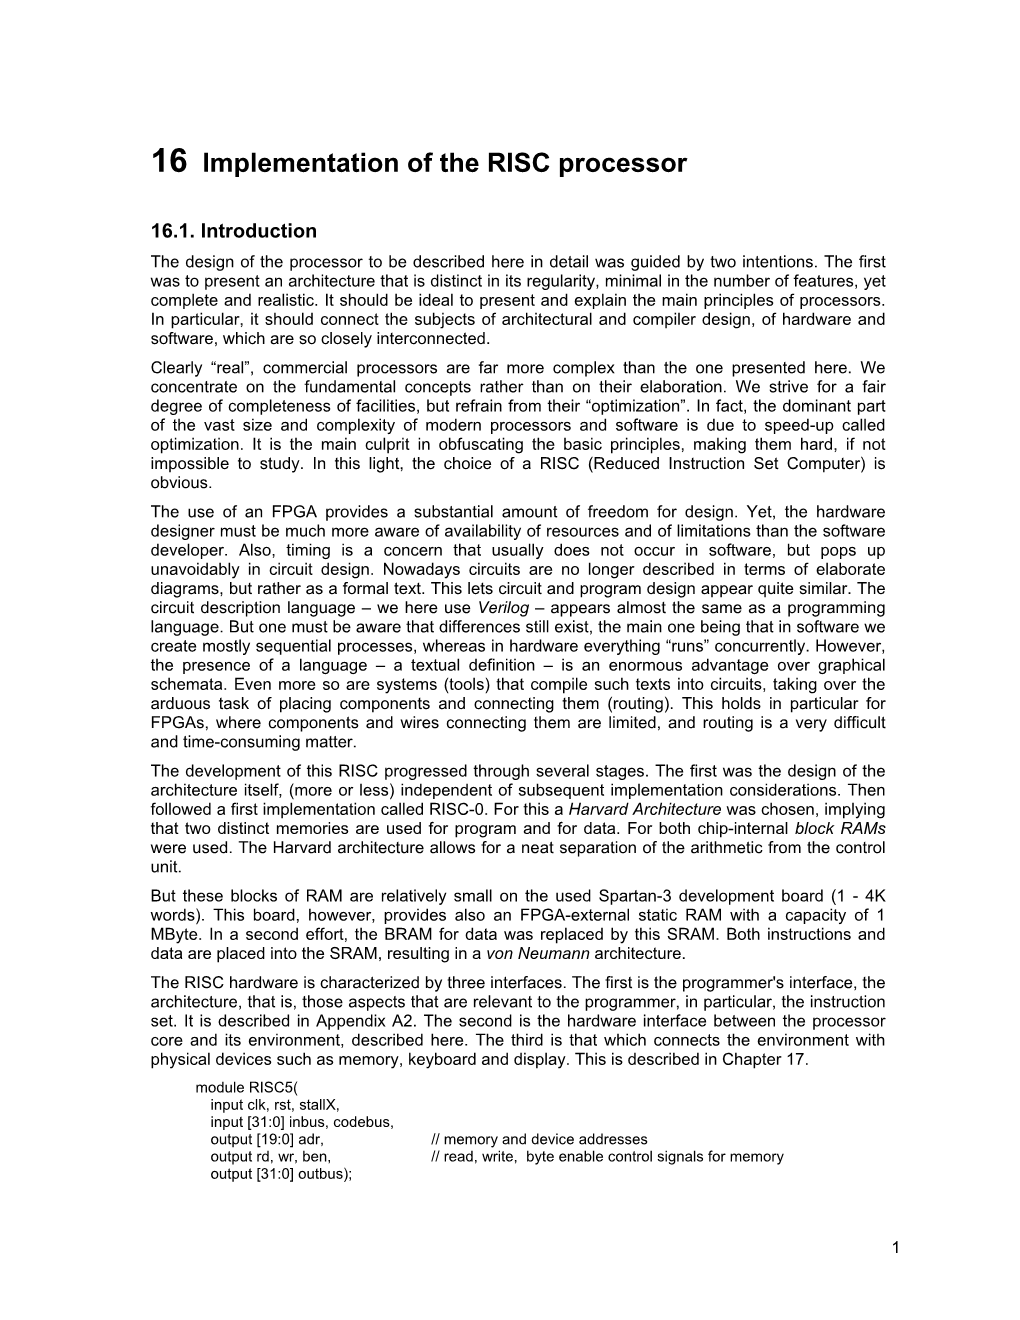 16 Implementation of the RISC Processor